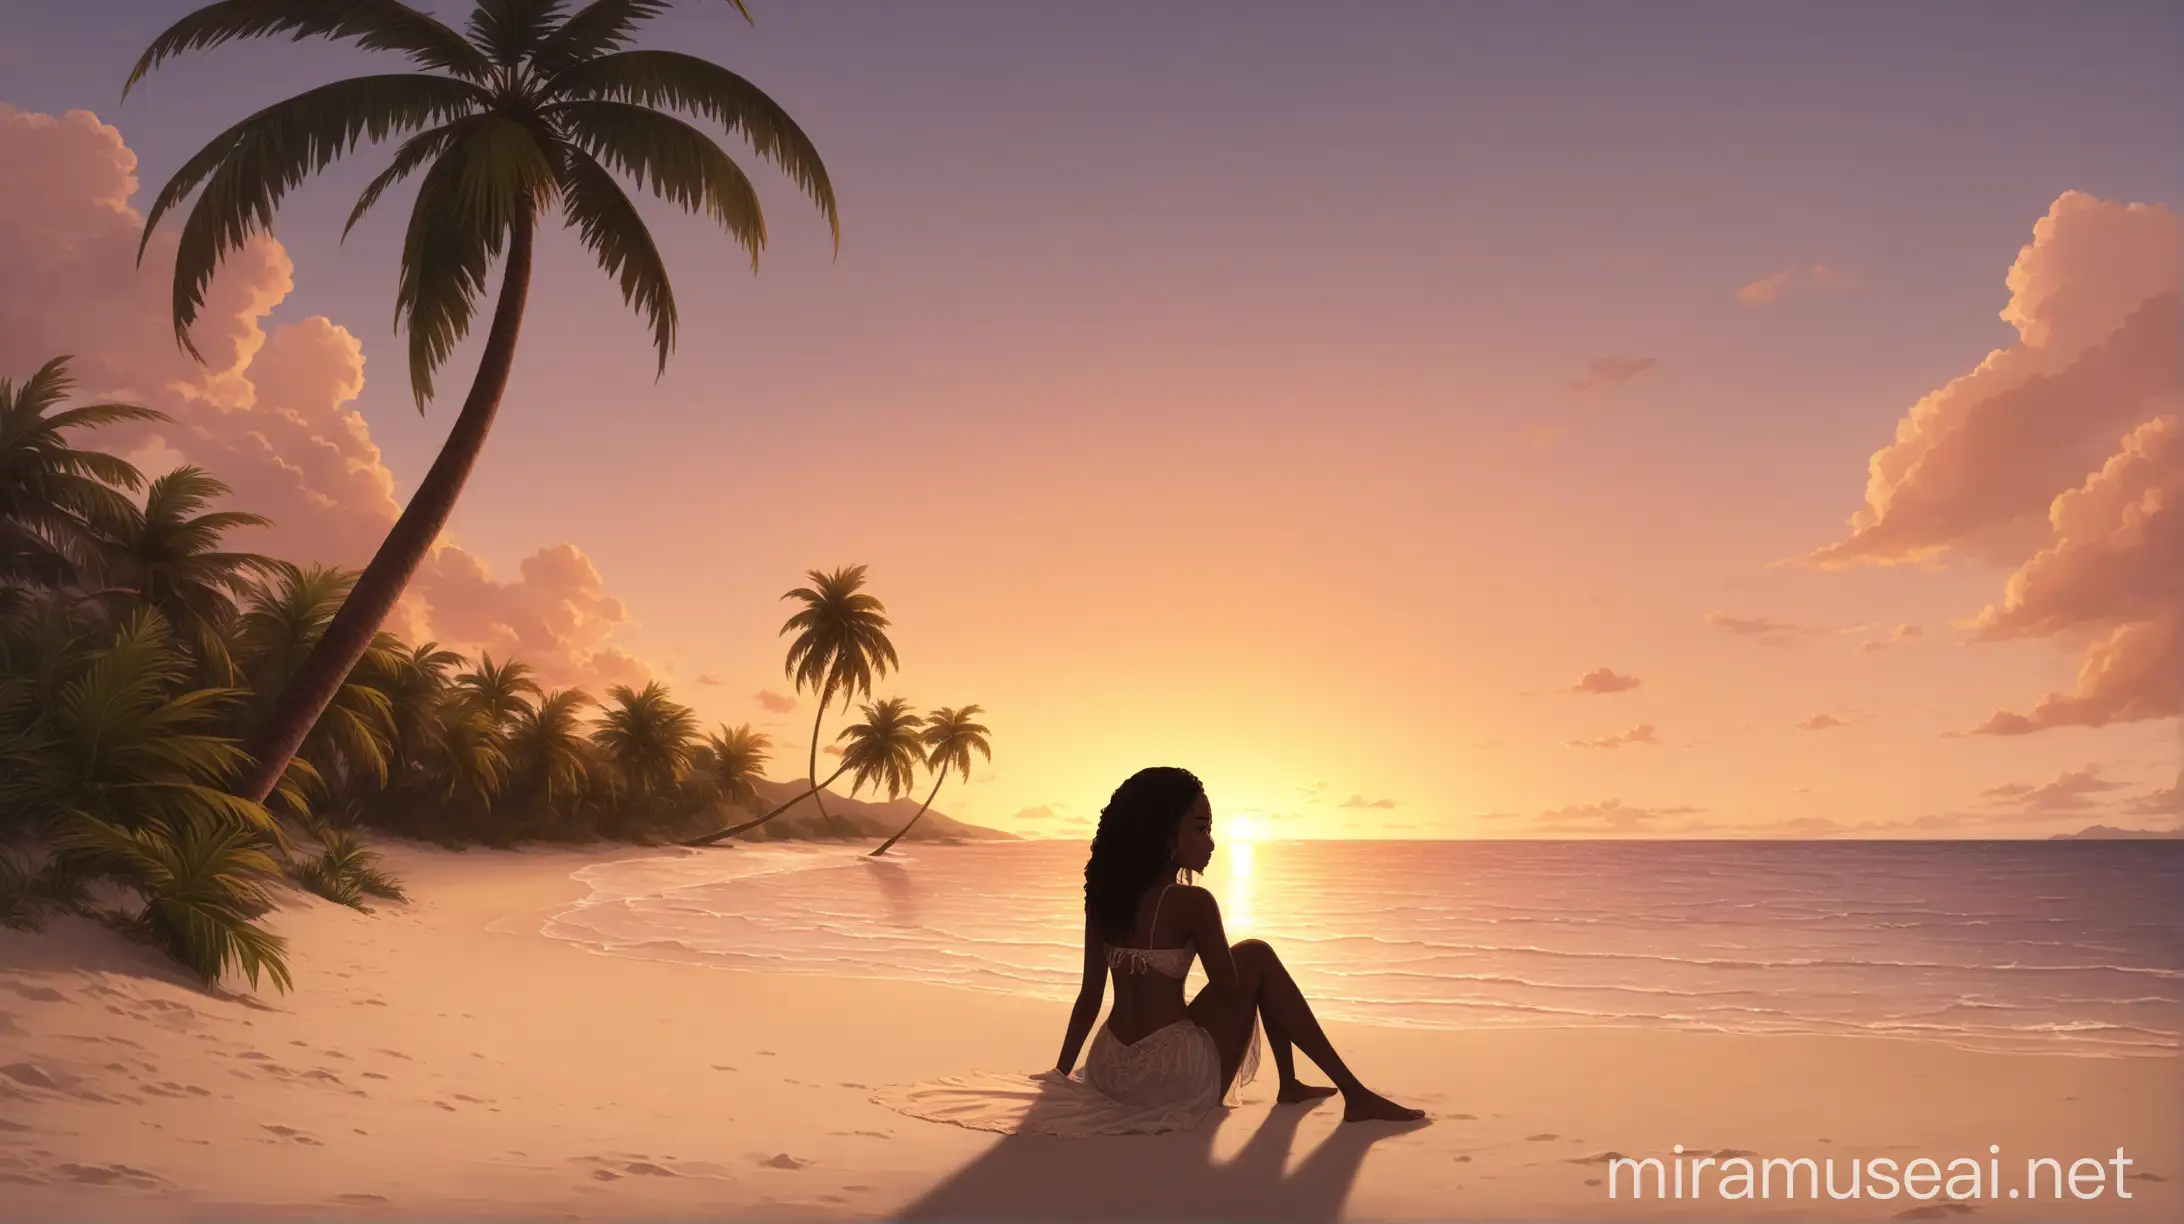 Caribbean Girl Relaxing on Beach at Sunset with Palm Trees